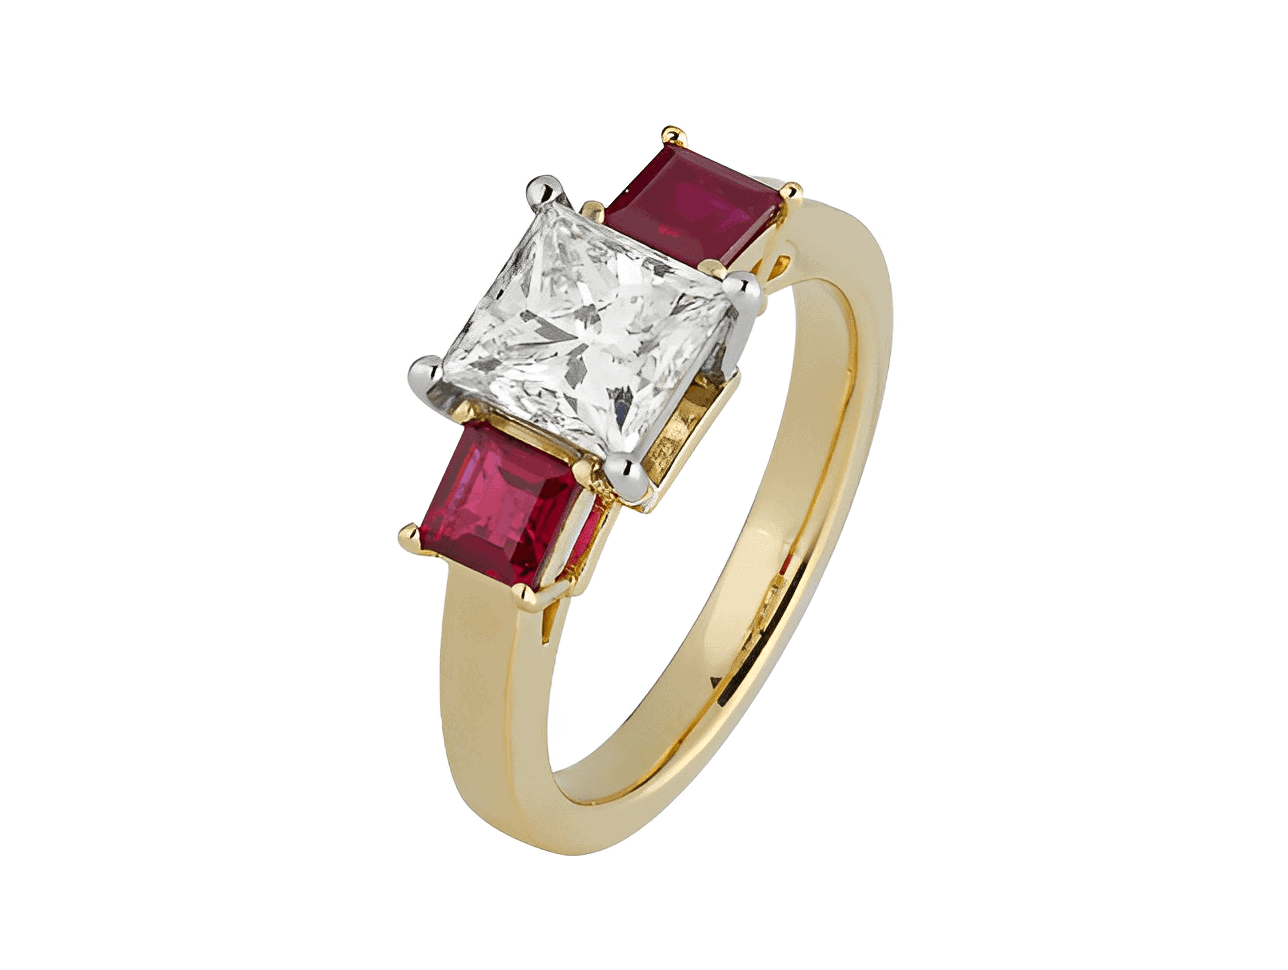 ruby and diamond engagement ring in yellow gold setting